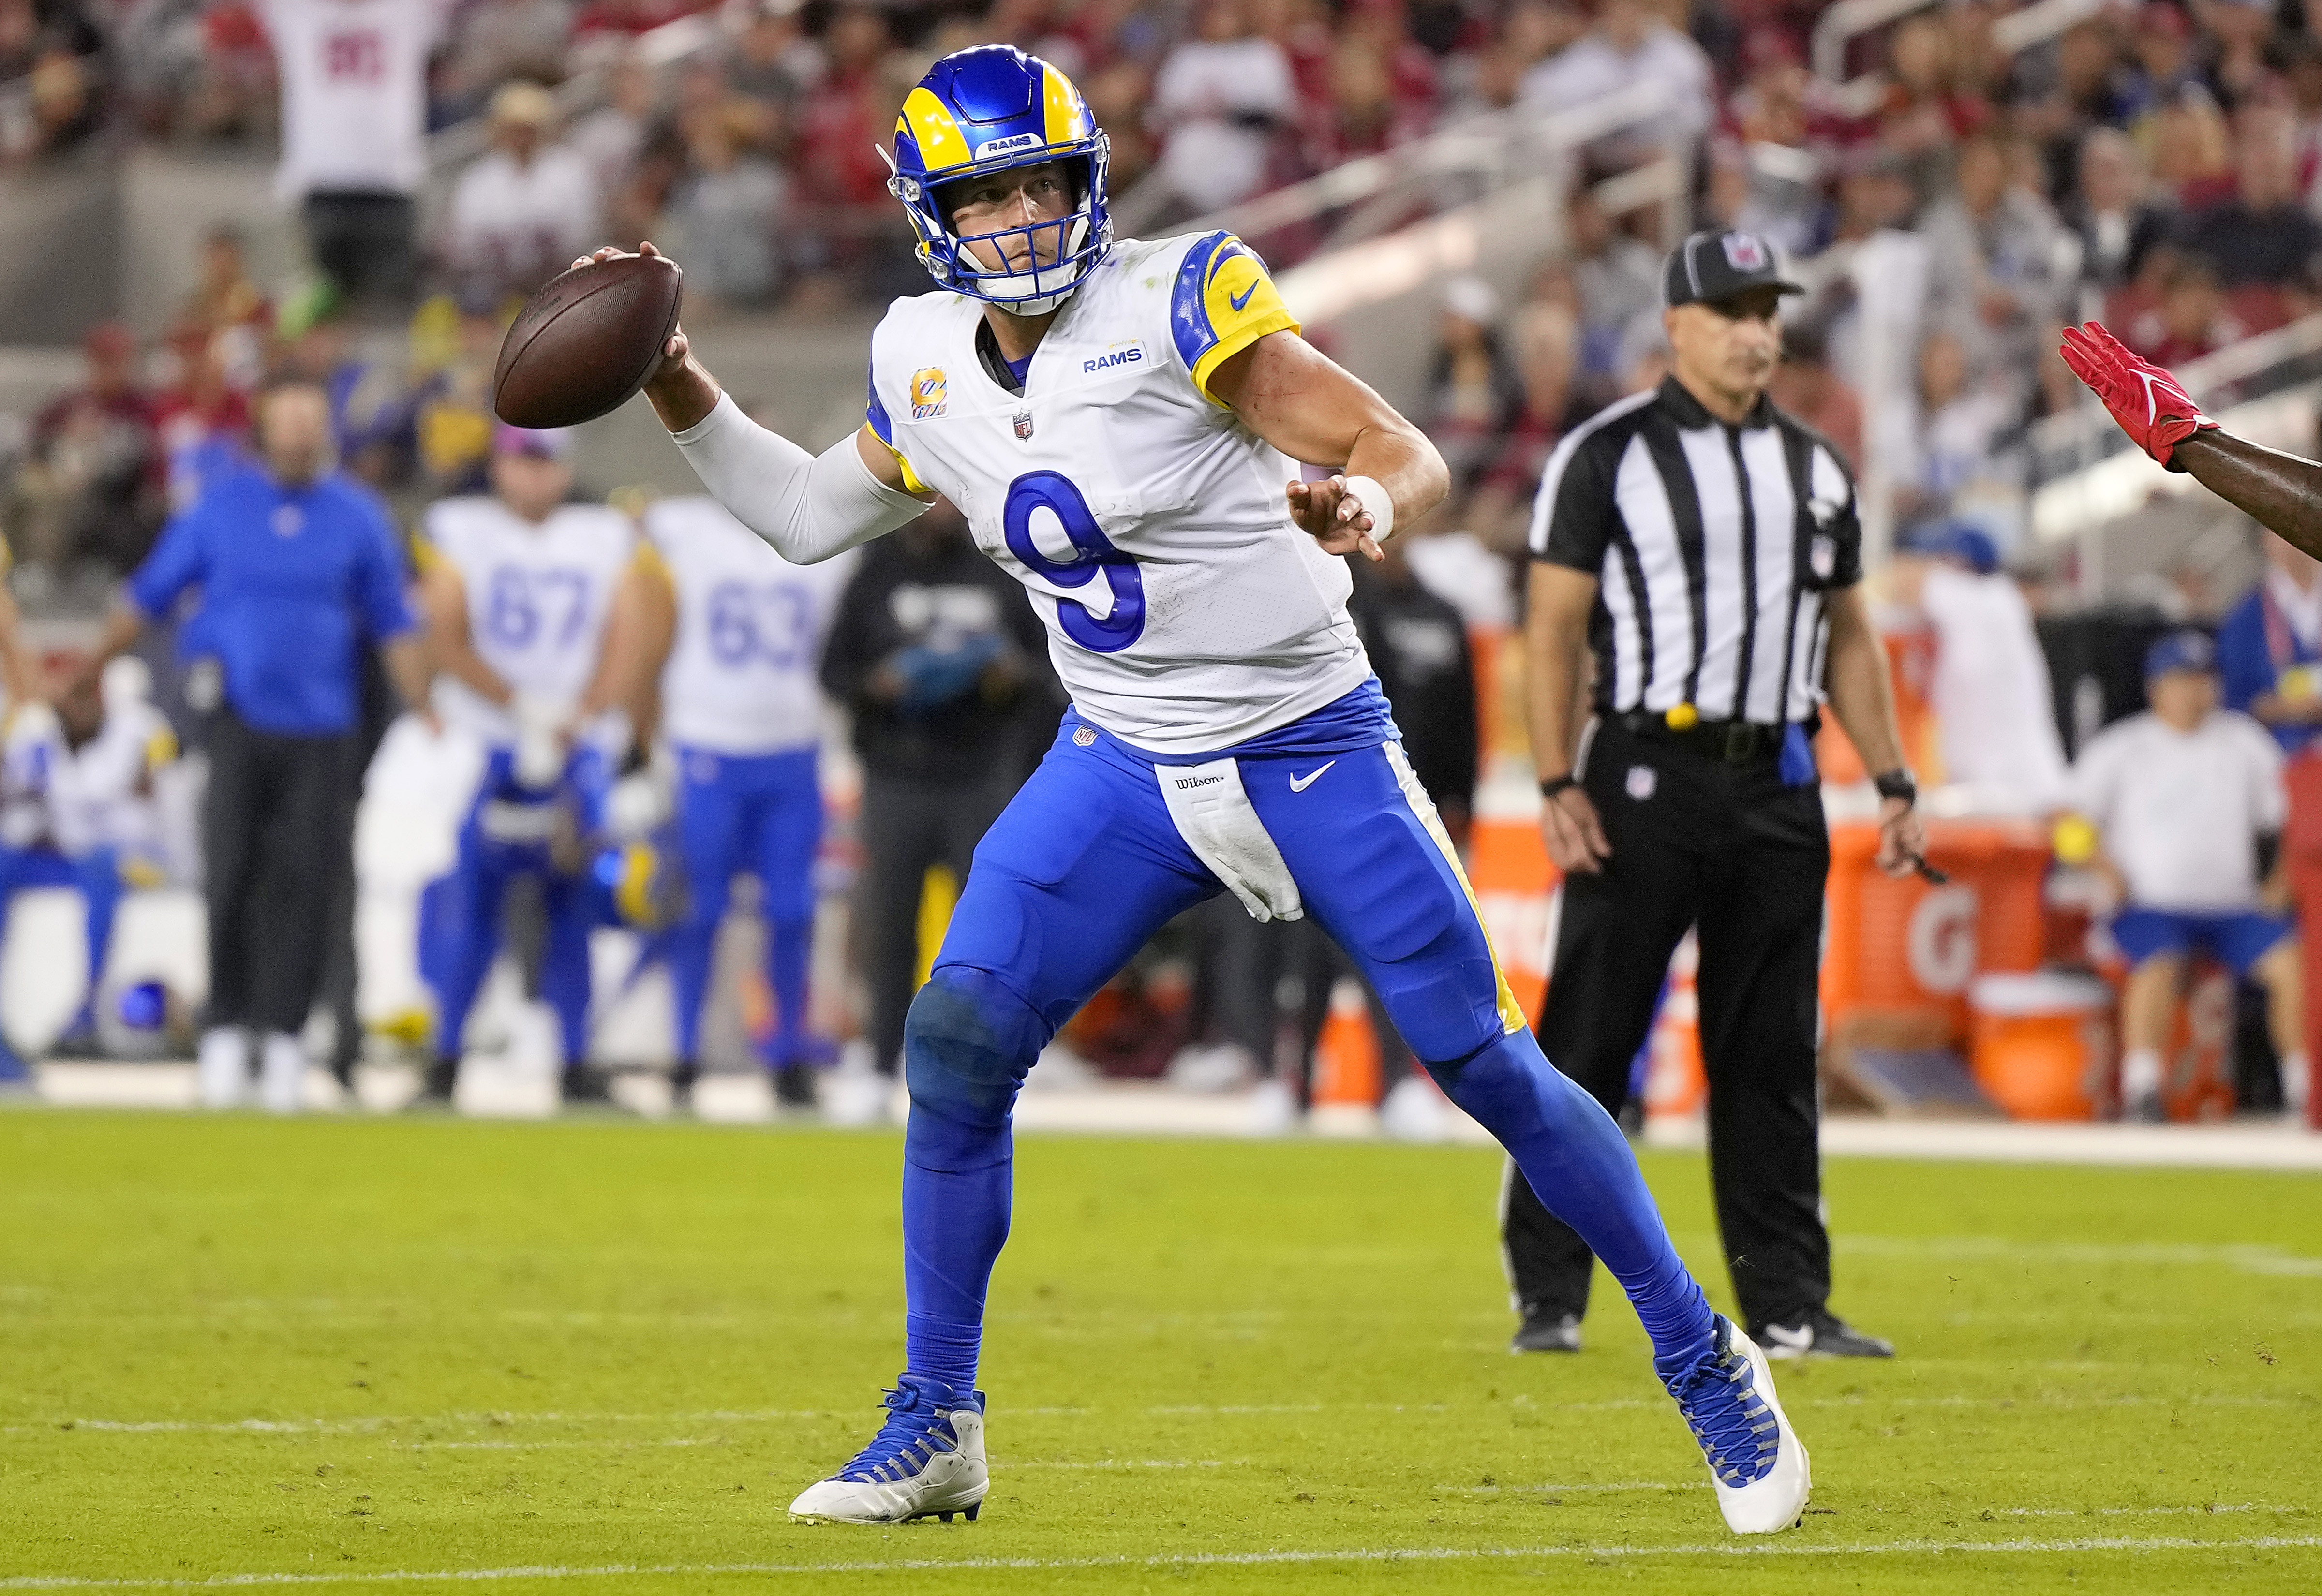 SANTA CLARA, CALIFORNIA - OCTOBER 03: Matthew Stafford #9 of the Los Angeles Rams rolls out looking to pass against the San Francisco 49ers in the third quarter at Levi’s Stadium on October 03, 2022 in Santa Clara, California.